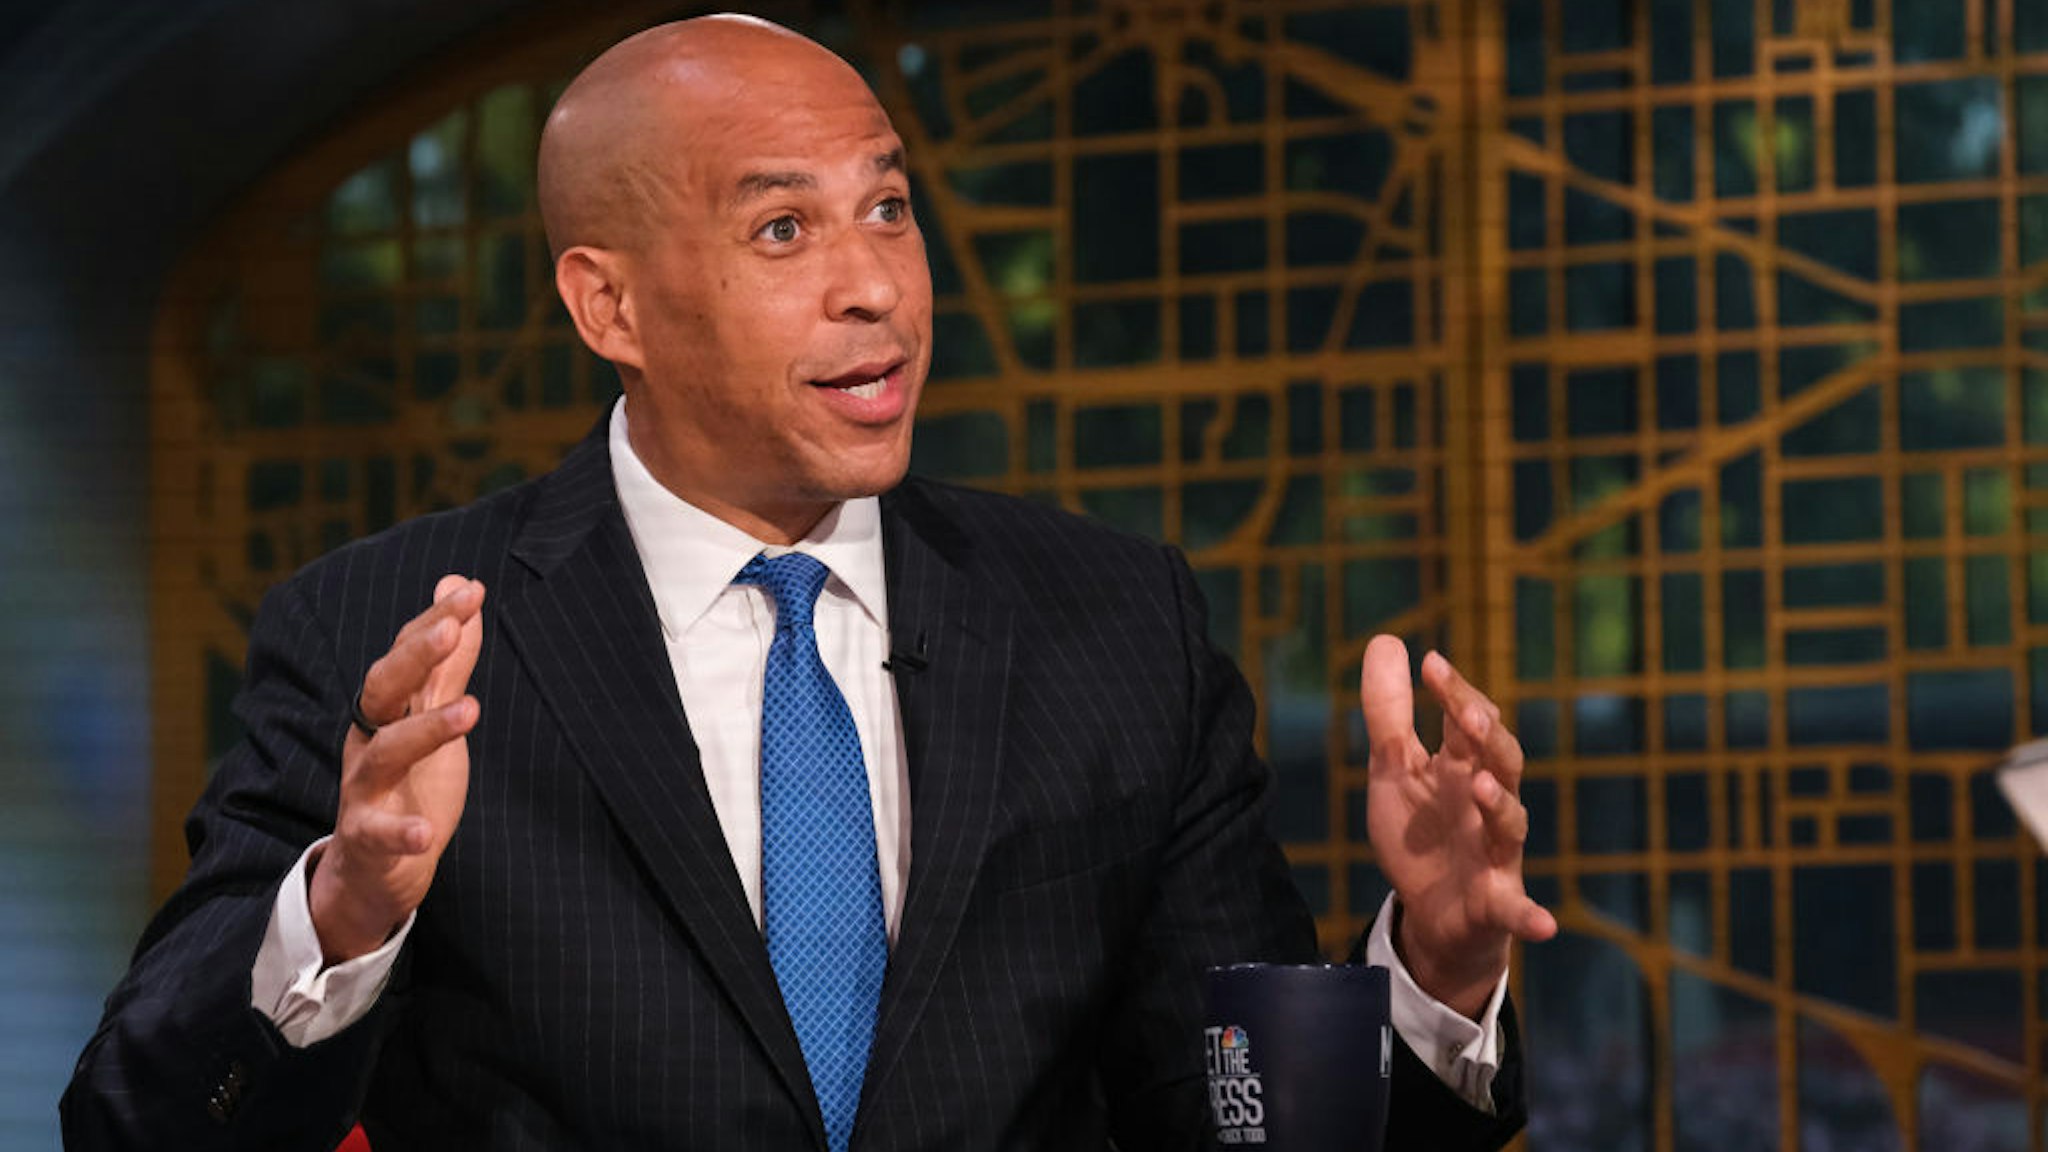 Pictured: (l-r) Sen. Cory Booker (D-N.J.) appears on Meet the Press" in Washington, D.C., Sunday, September 26, 2021.